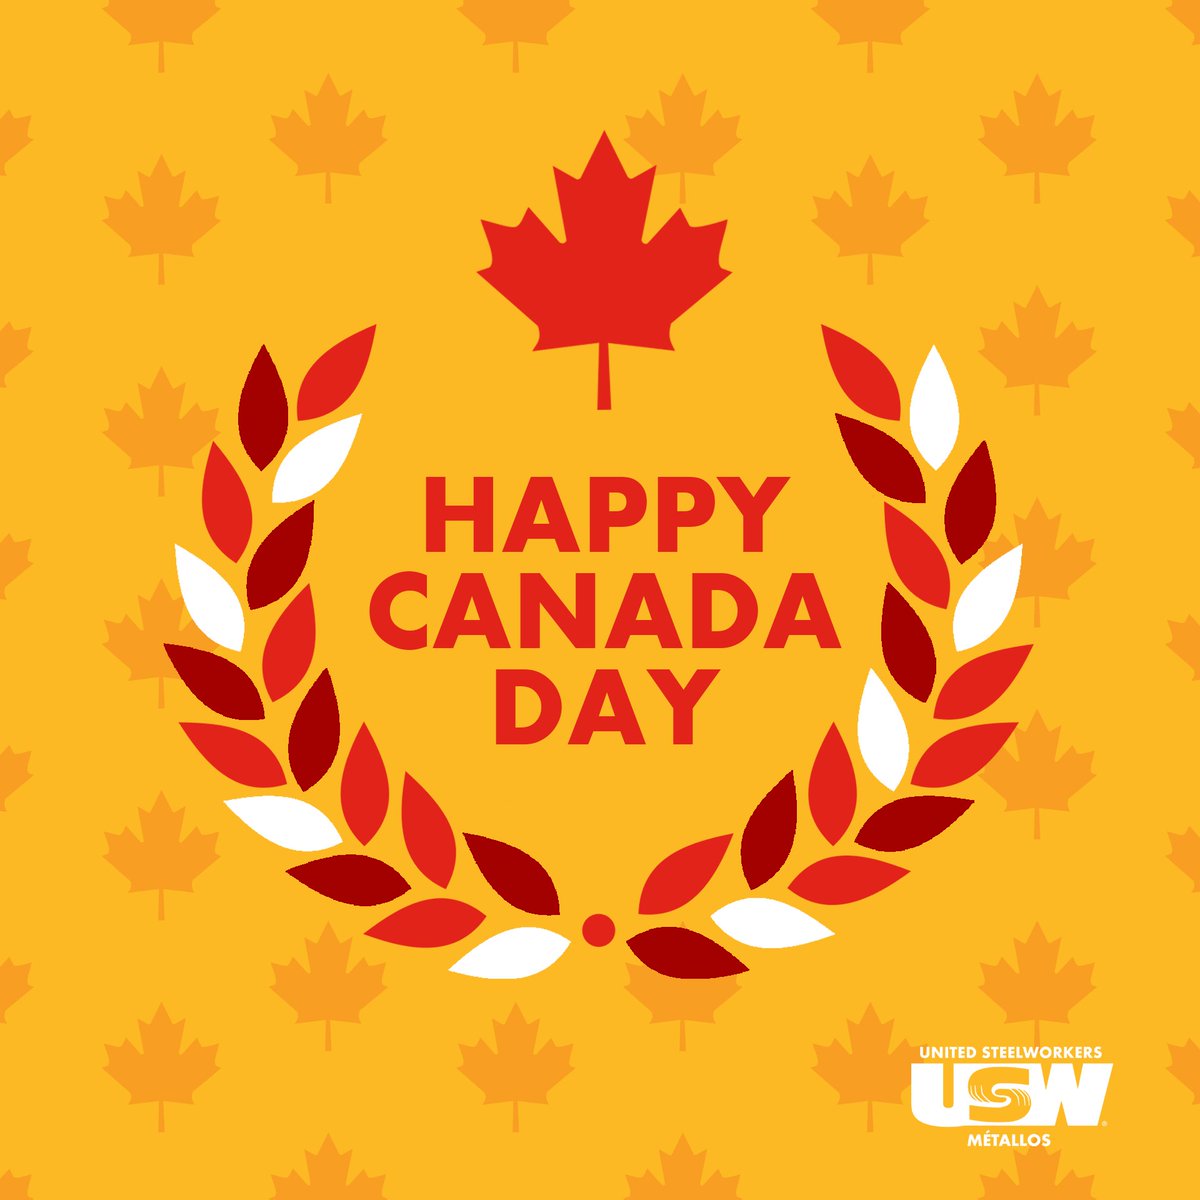 Happy Canada Day, Steelworkers! 🇨🇦 While there is a lot to celebrate & be grateful for, we must also remember to reaffirm our commitment to reconciliation w/ Indigenous communities across Turtle Island, including Indigenous Steelworkers who work to make our union better.